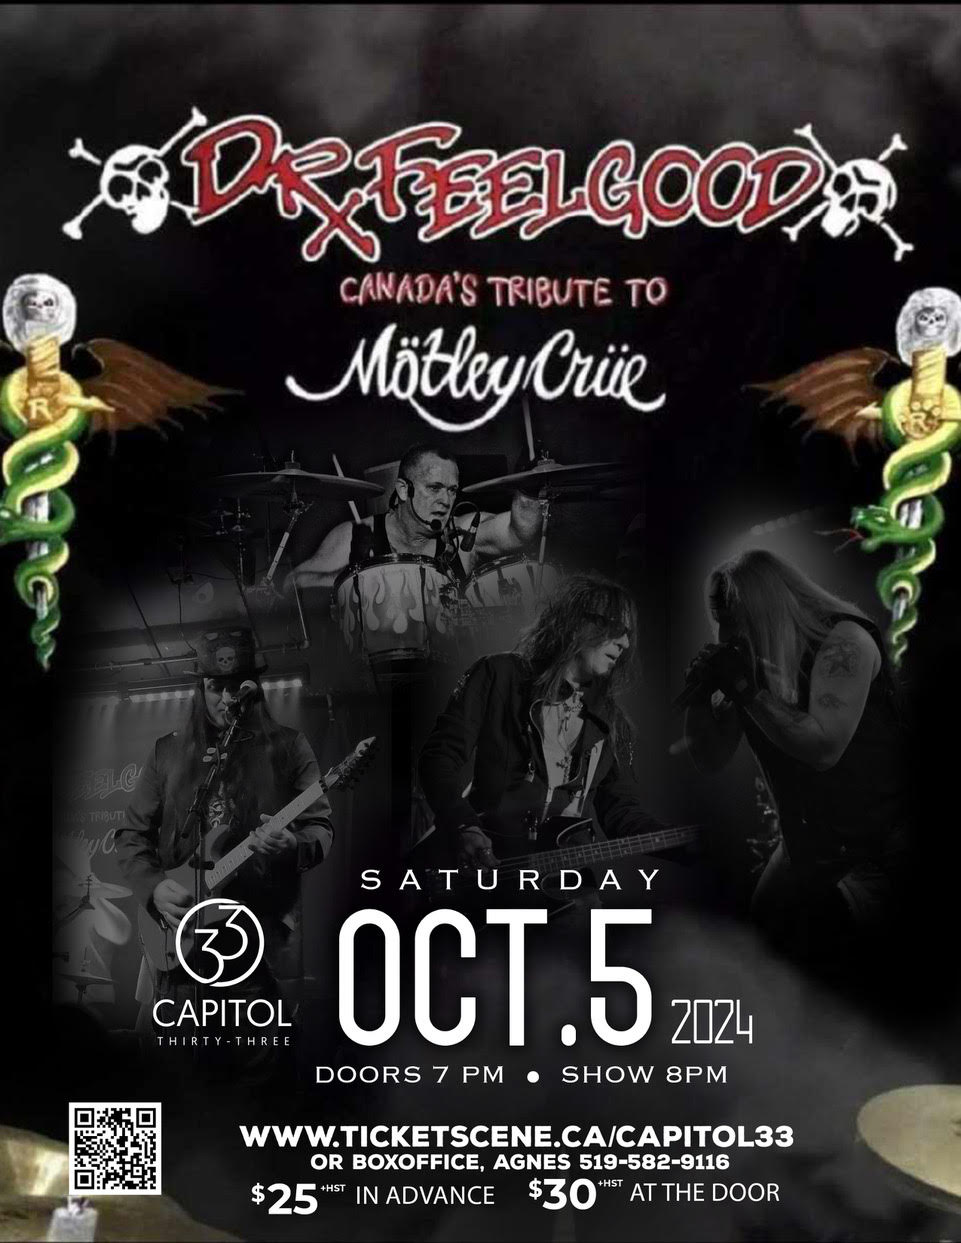 Dr Feelgood - Canadas tribute to Motley Crue